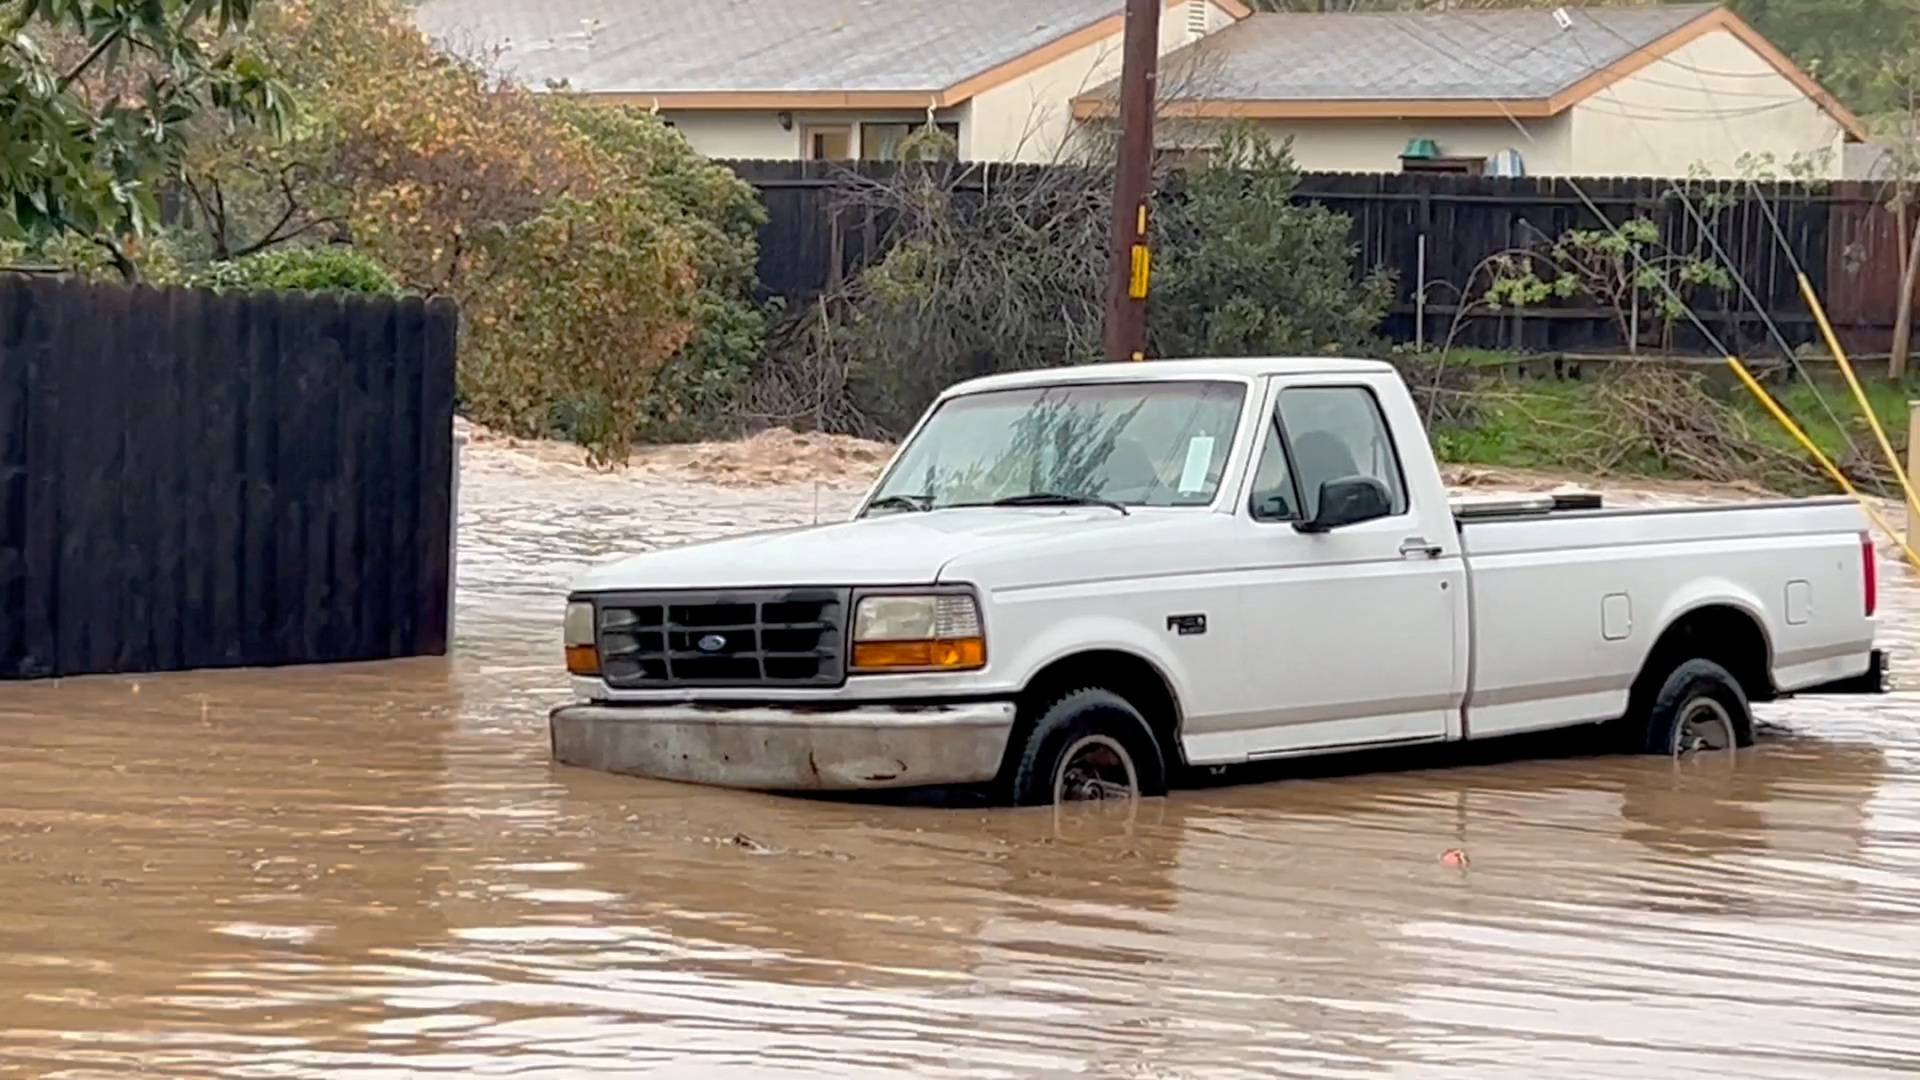 A vehicle lies partially submerged on a flooded street in Santa Barbara